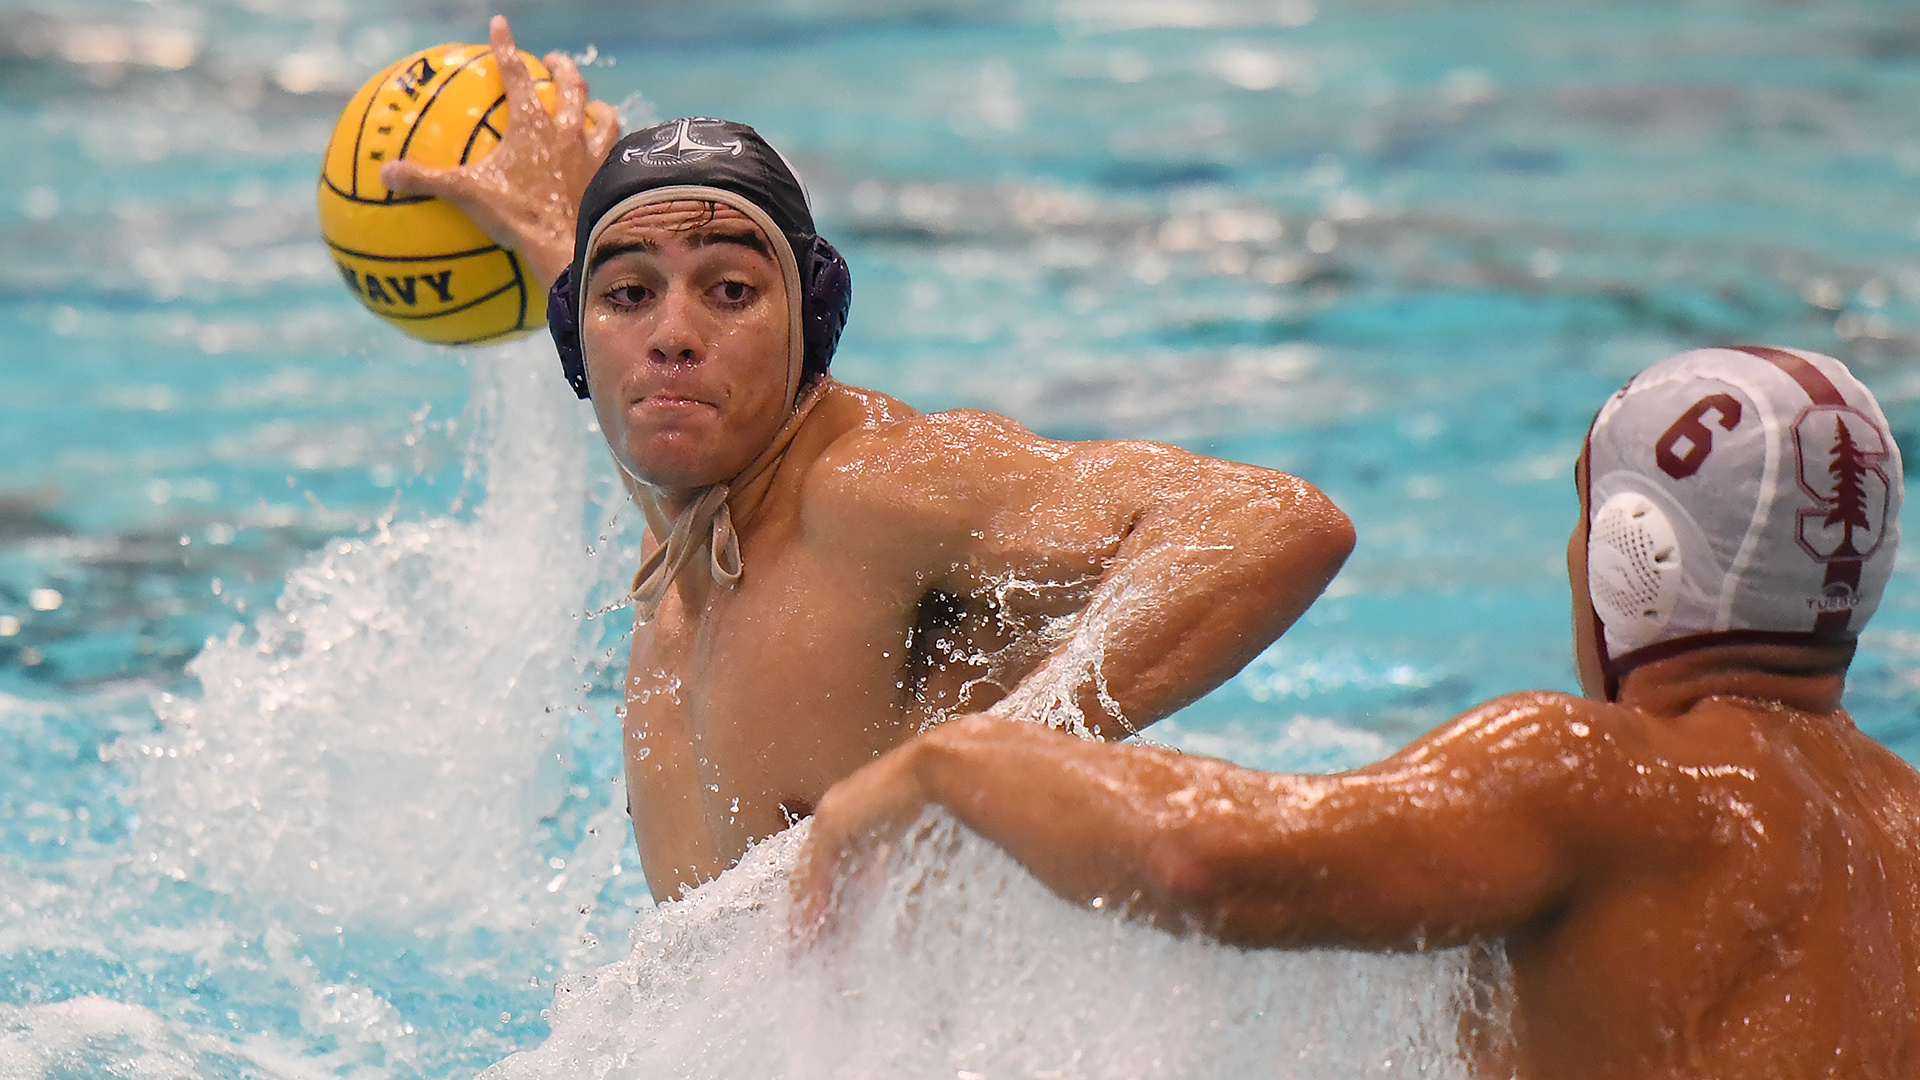 Water Polo: Isaac Salinas, The US Navy senior team captain, A two-time ACWPC All-American. 1920x1080 Full HD Wallpaper.